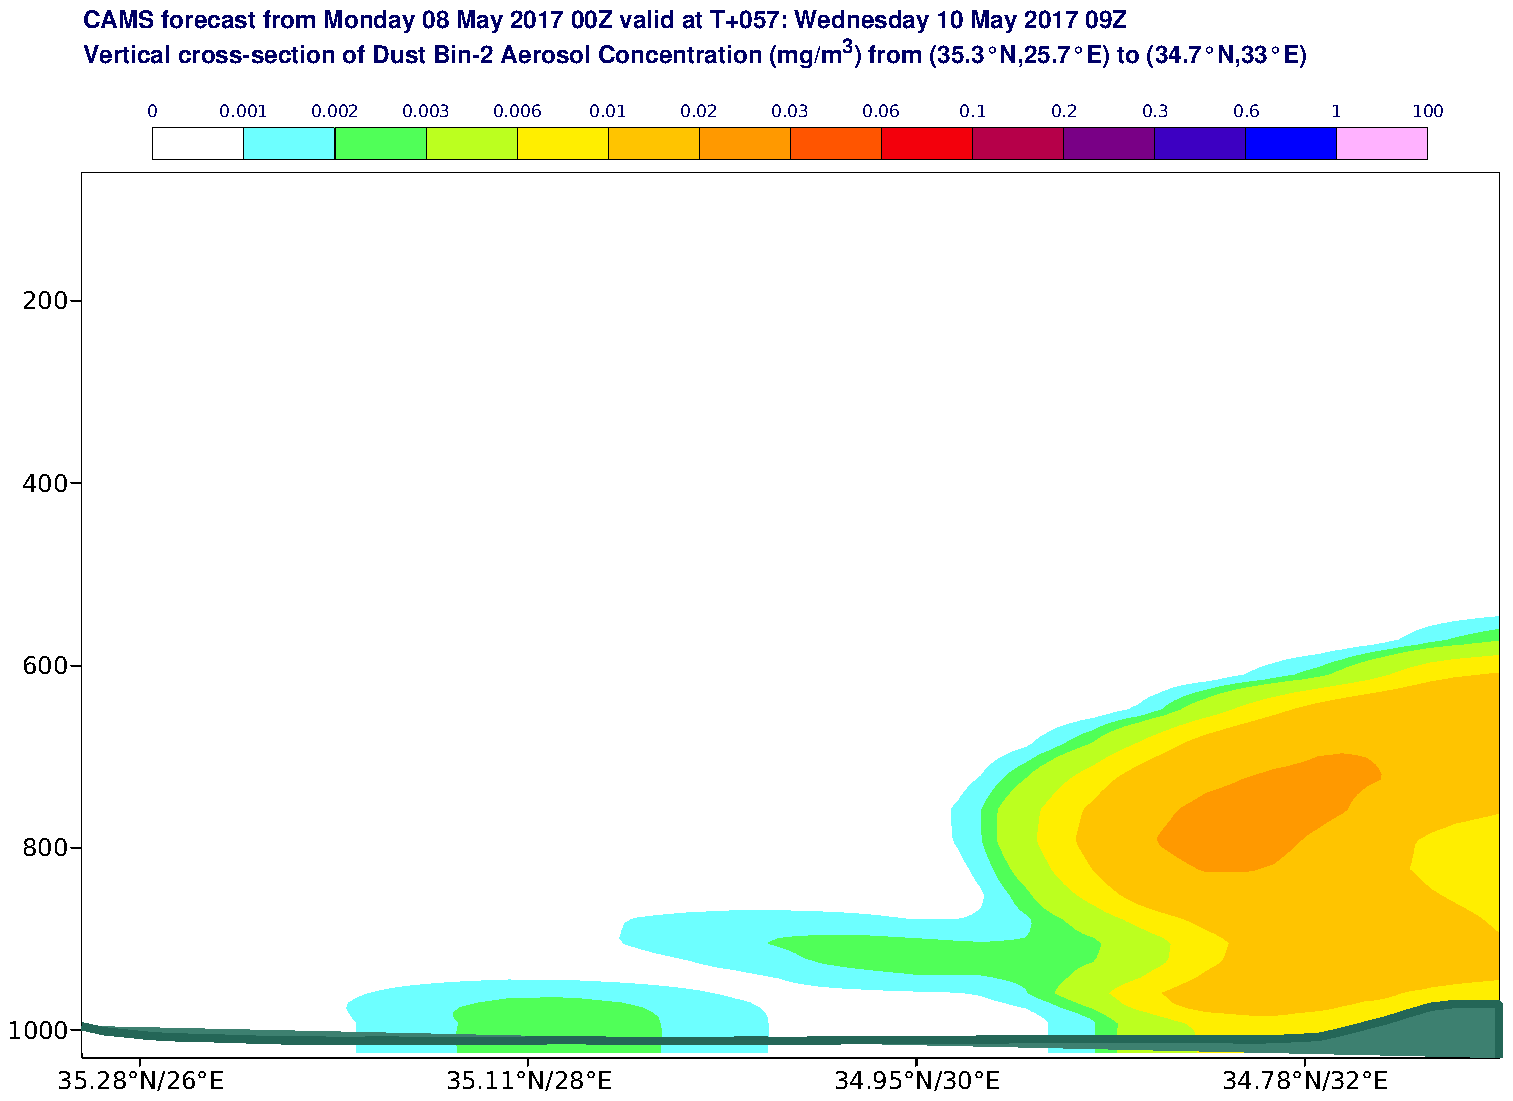 Vertical cross-section of Dust Bin-2 Aerosol Concentration (mg/m3) valid at T57 - 2017-05-10 09:00